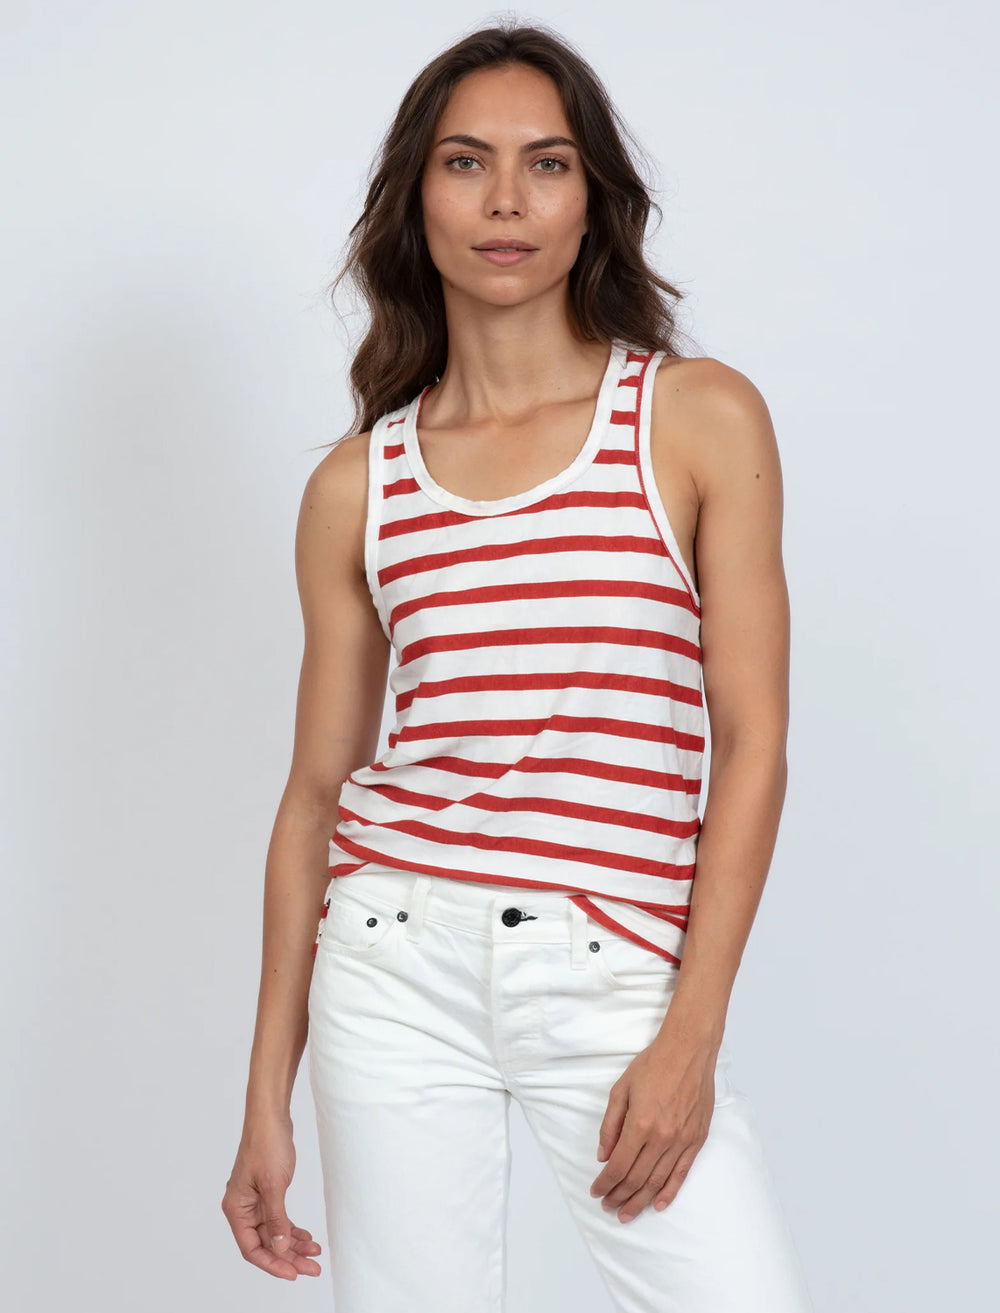 Model wearing ASKK NY's printed tank in red and white stripe.